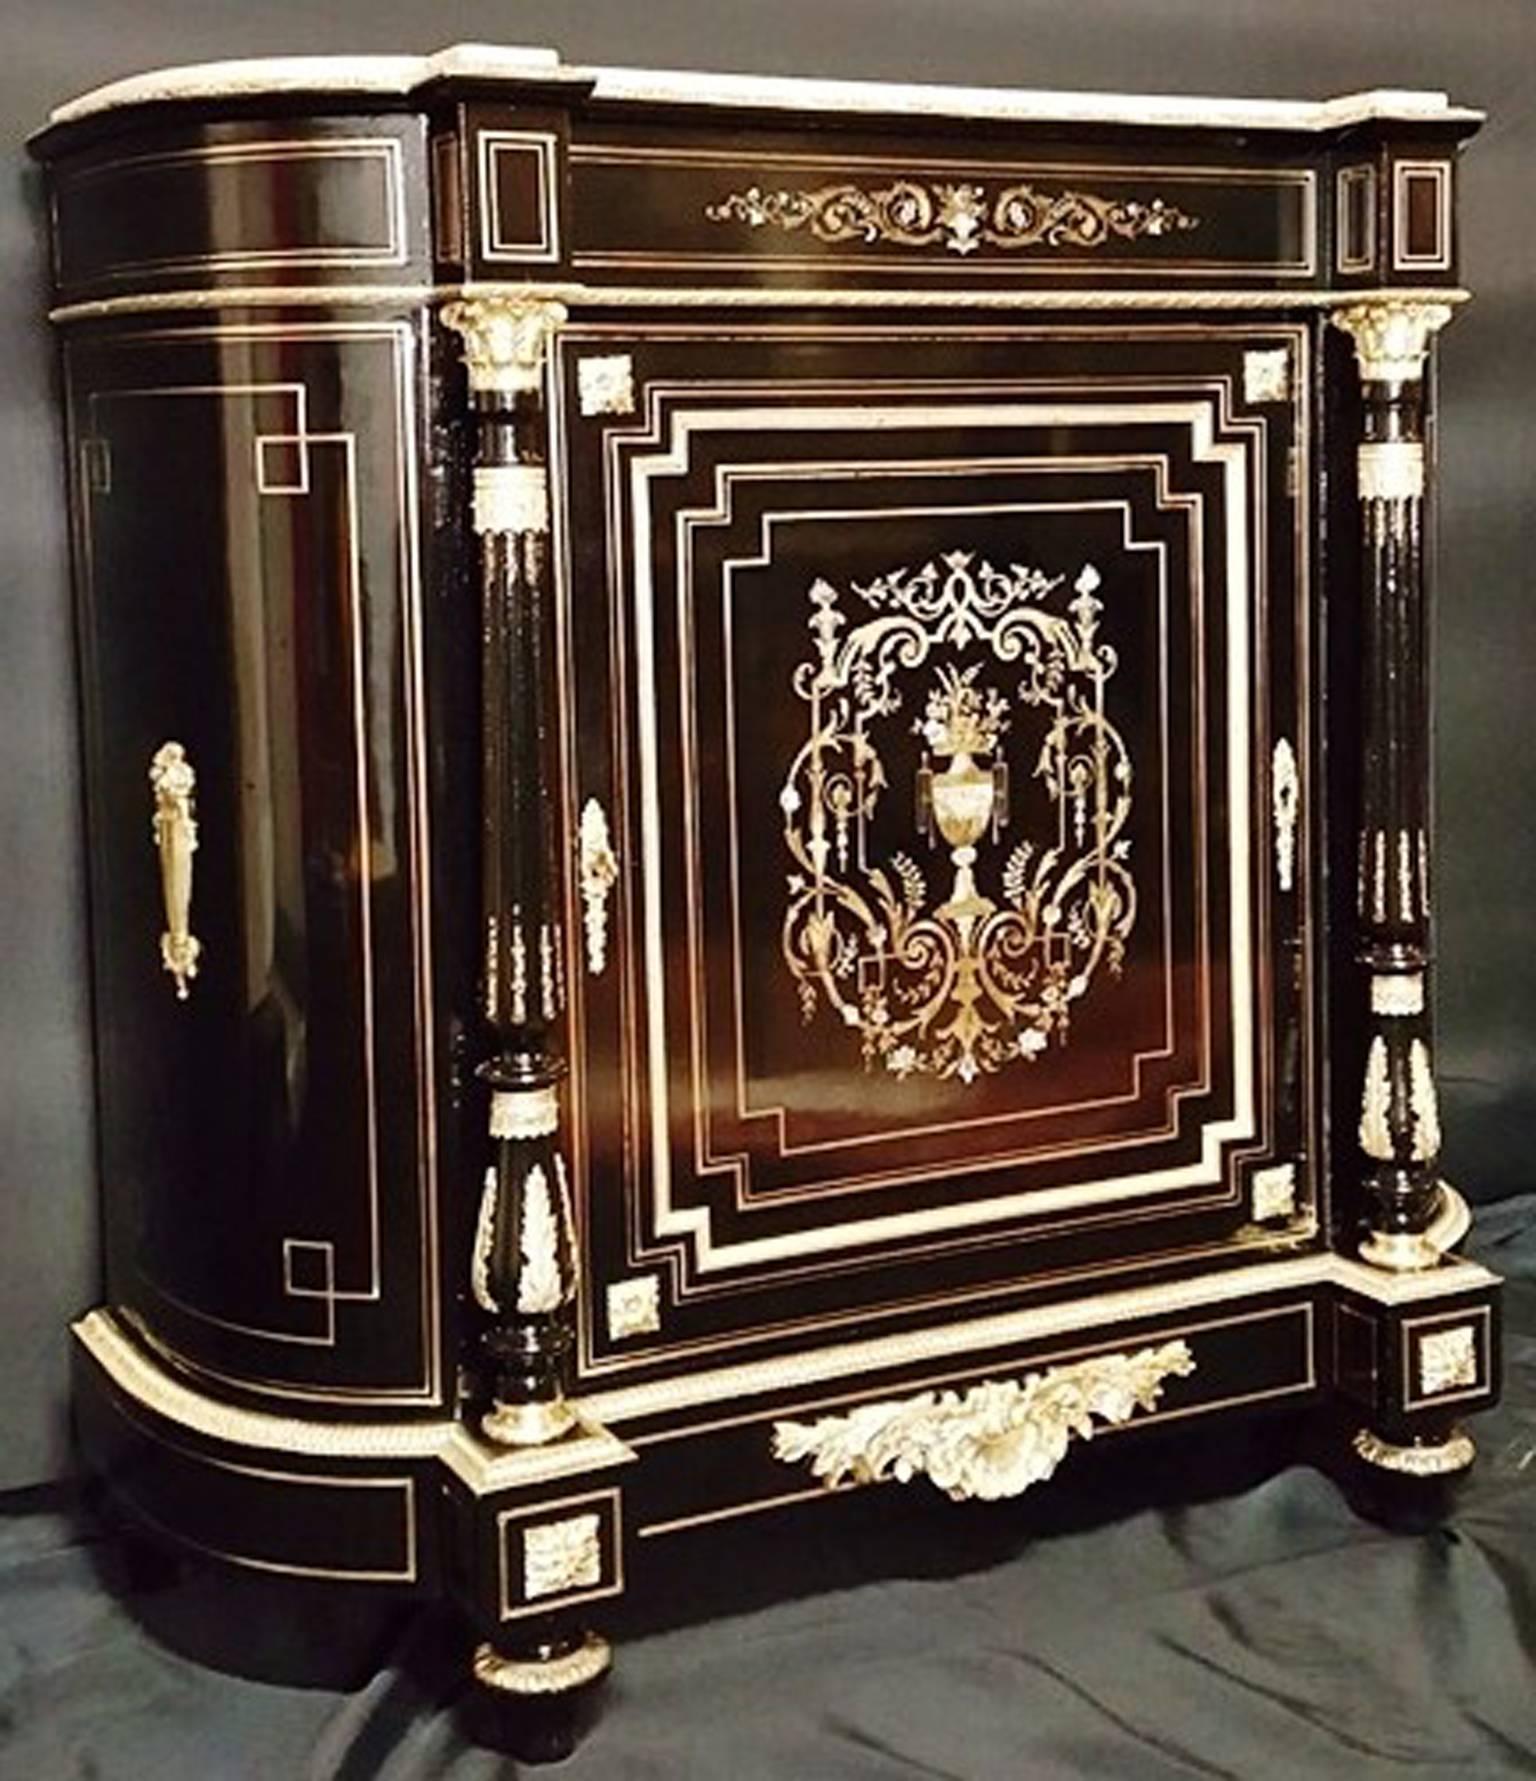 French curved cabinet in Boulle brass inlaid marquetry with scroll work, leaves and tracery ornamental motif. 

Marquetry in three different materials: mother-of-pearl, bone and brass. Wonderful and important ornamental of gilt bronzes with